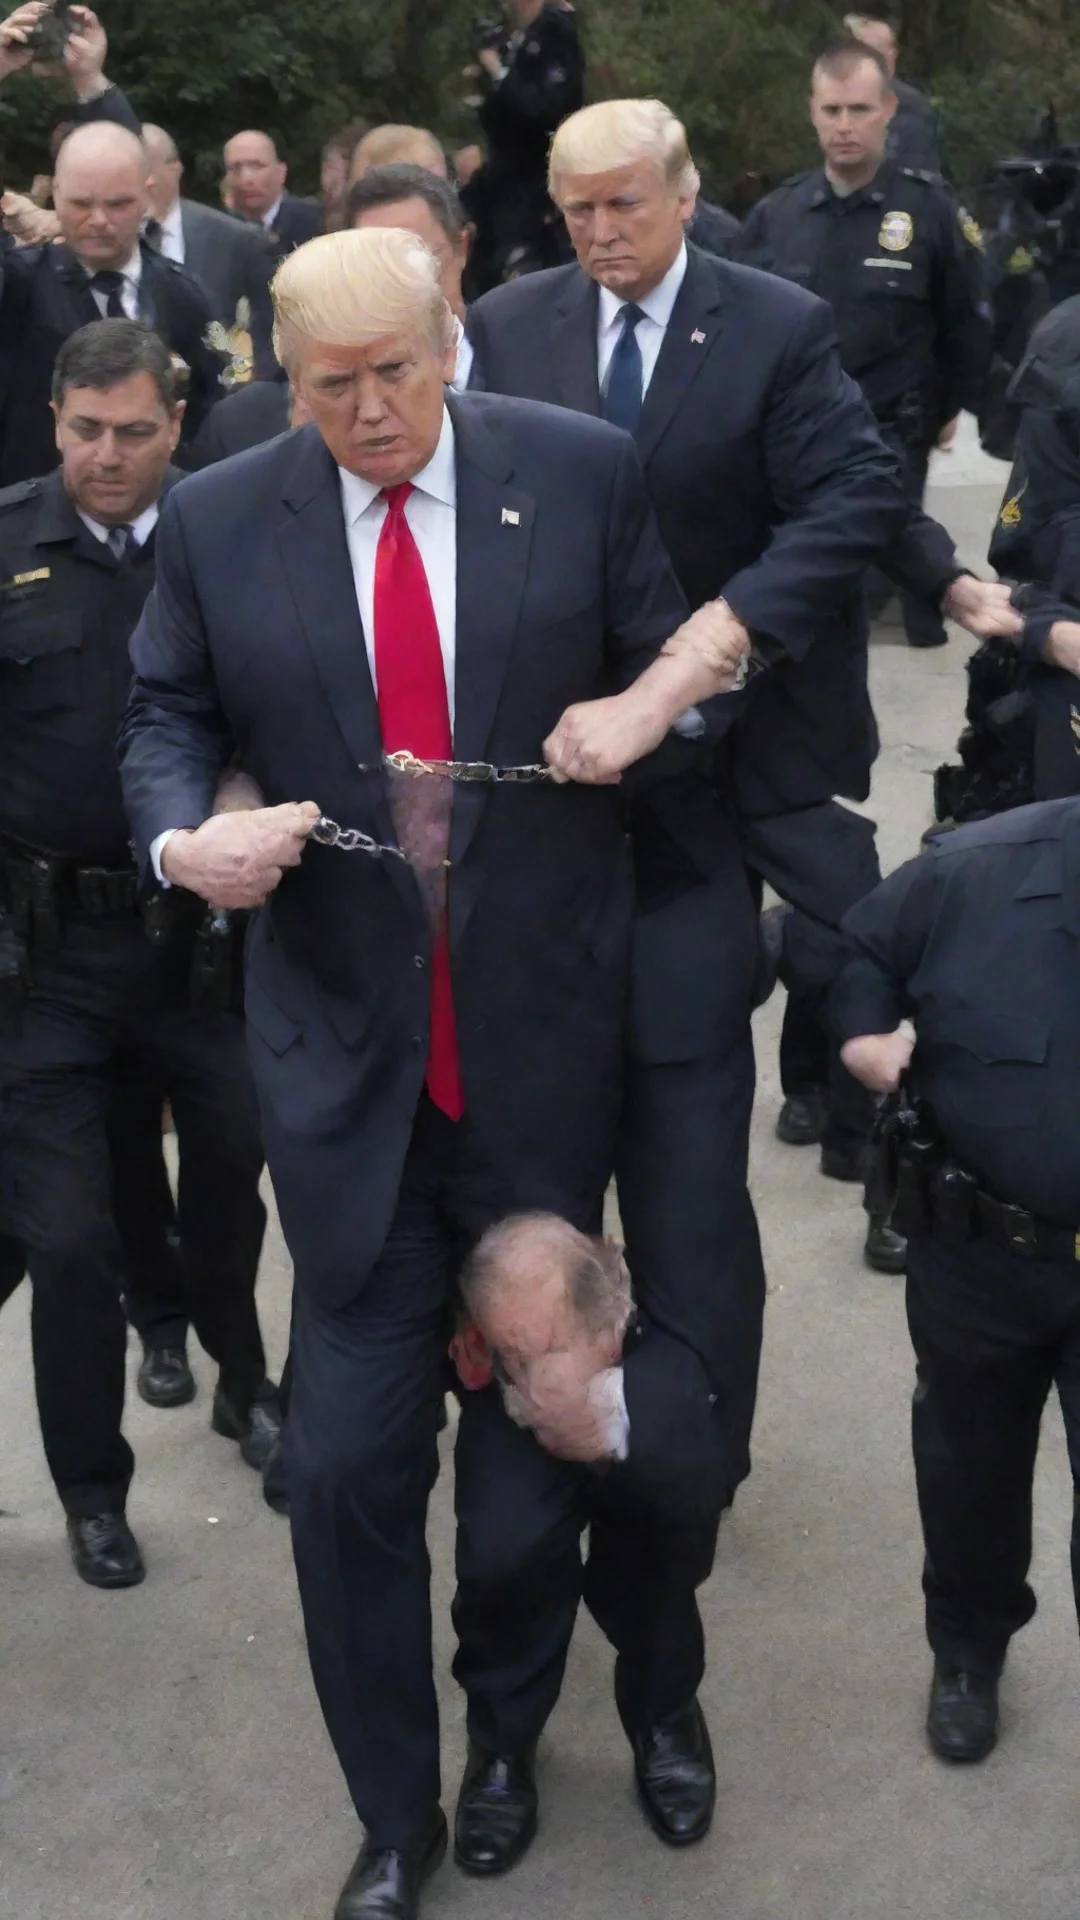 aidonald trump being led away in handcuffs tall